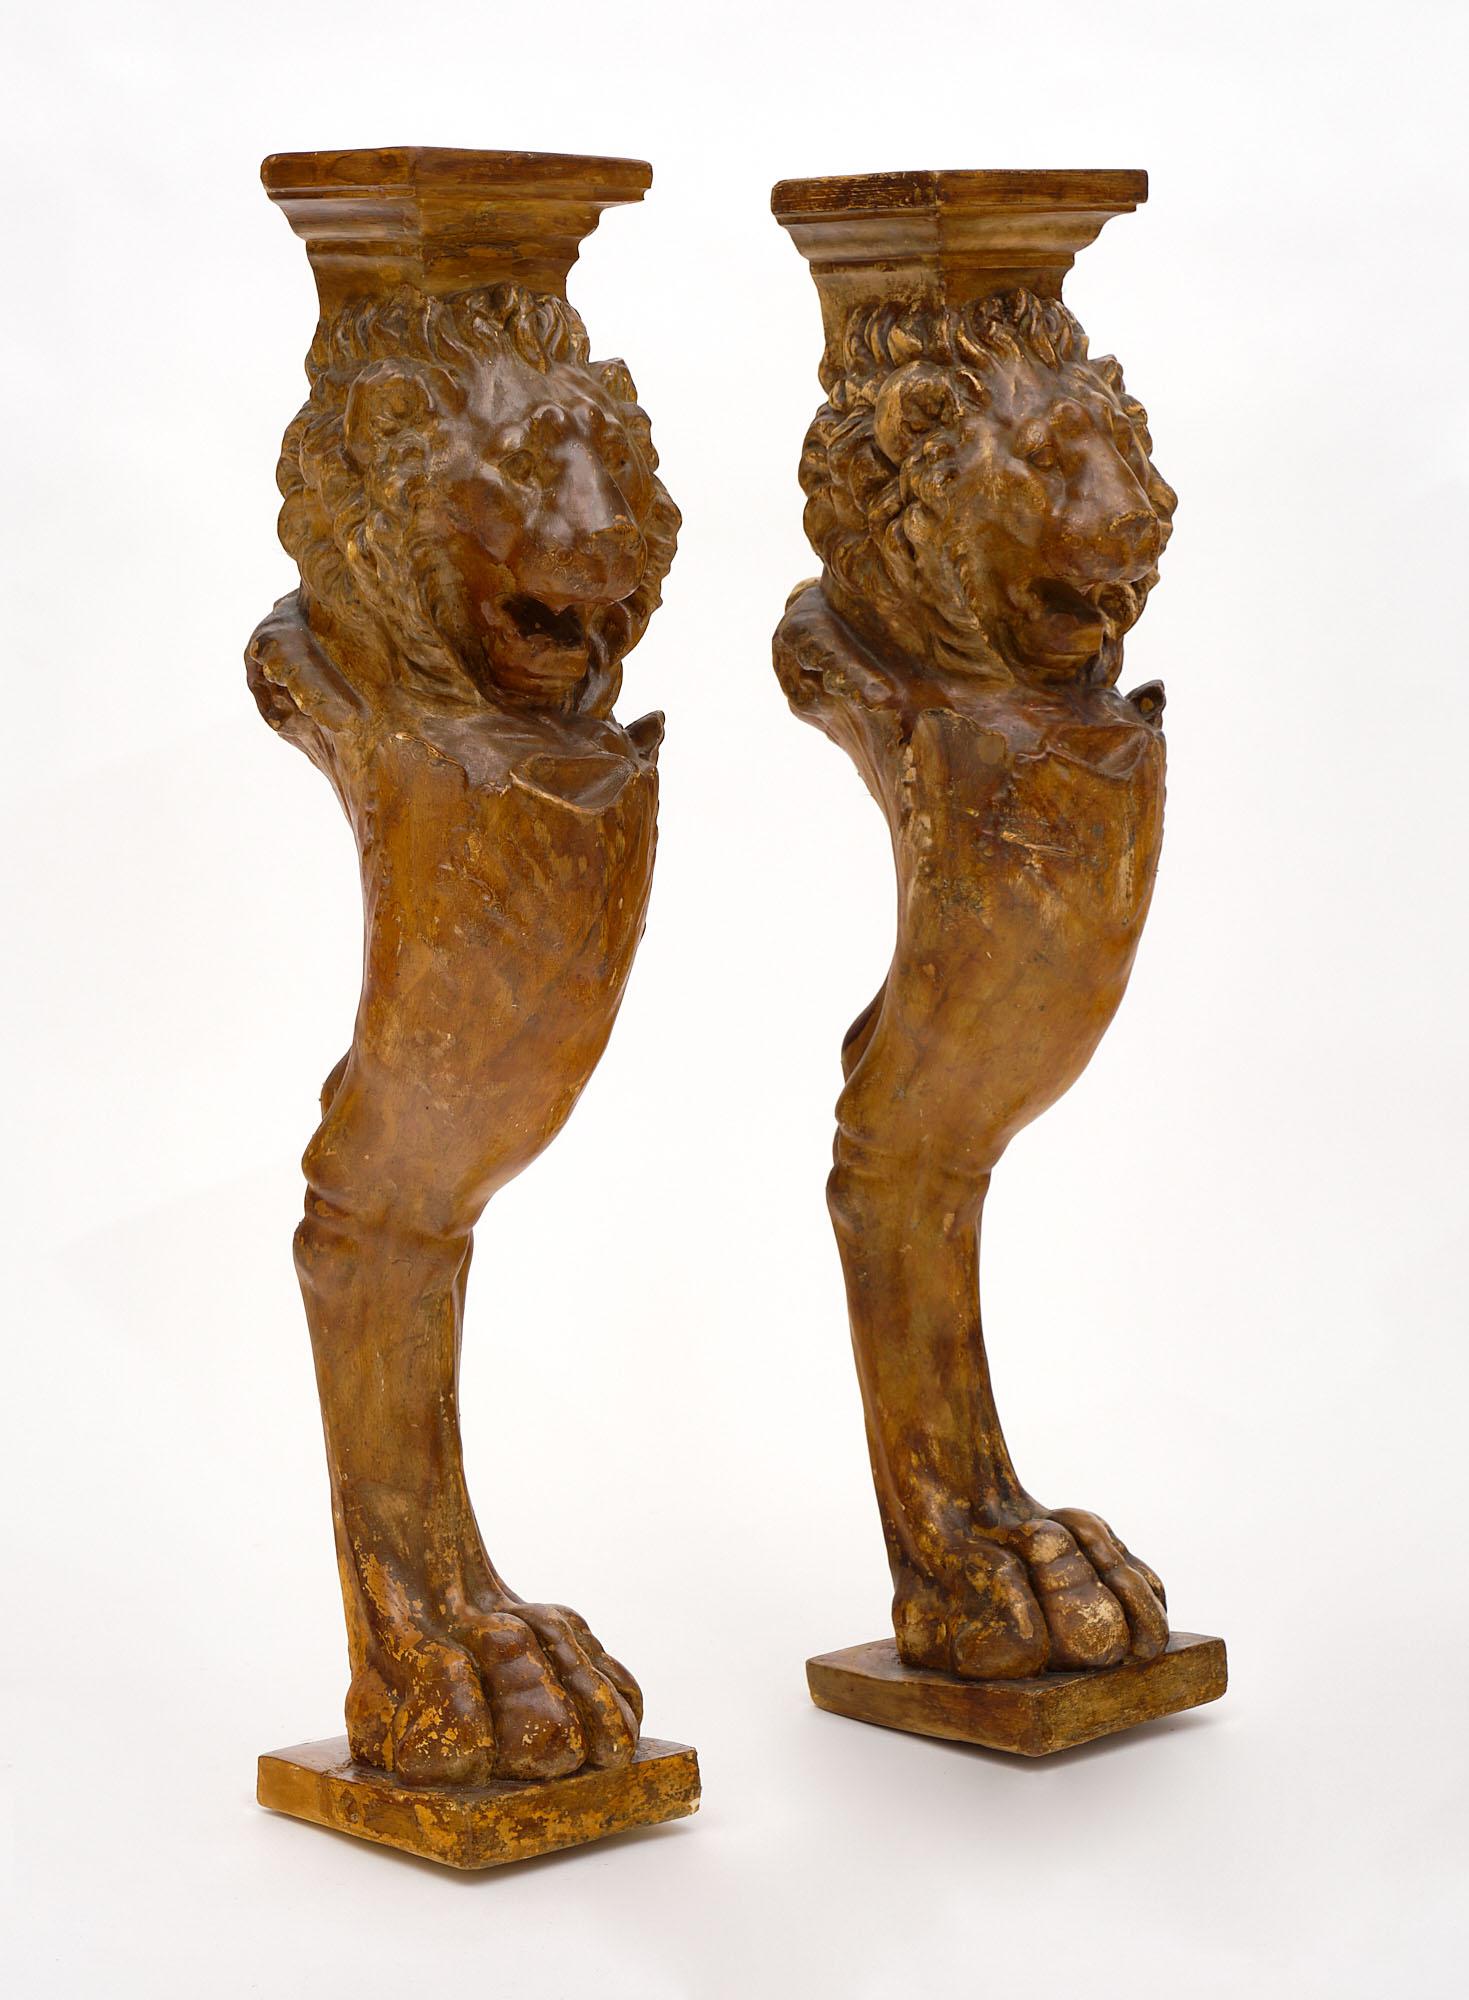 Pair of stucco lion pillars for a fireplace or console. They have a beautiful terra-cotta patina.